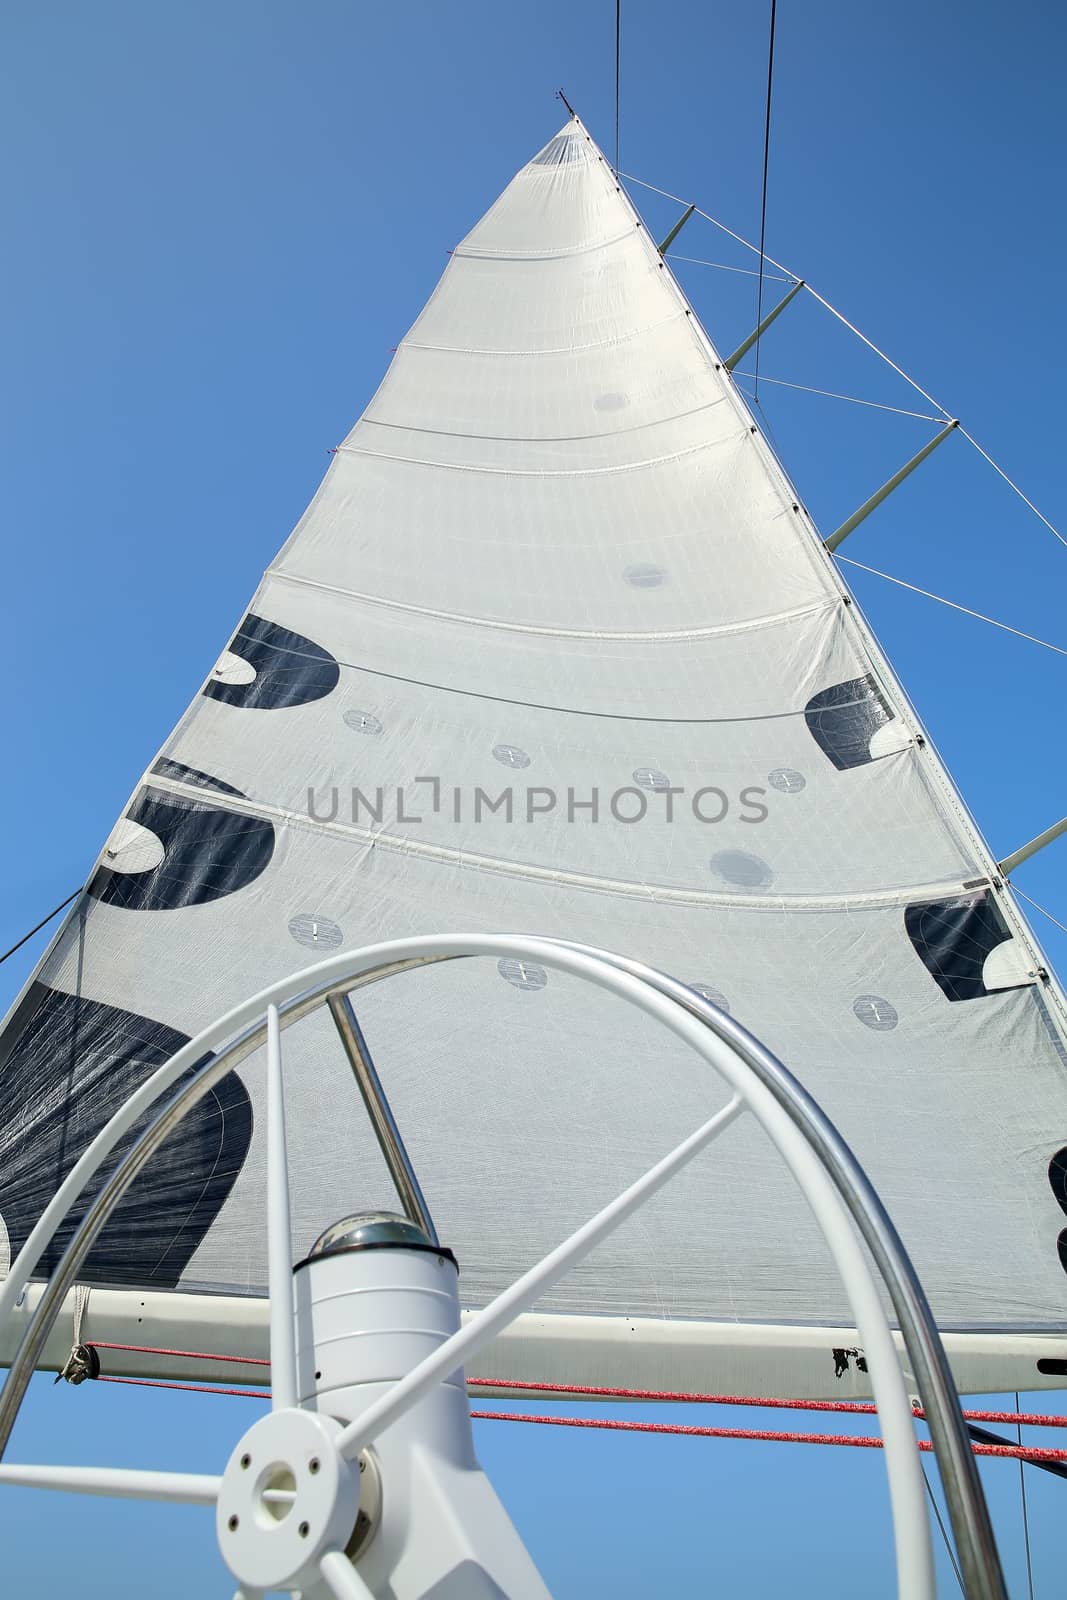 The mast, sail and rudder of the yacht on the background of blue sky